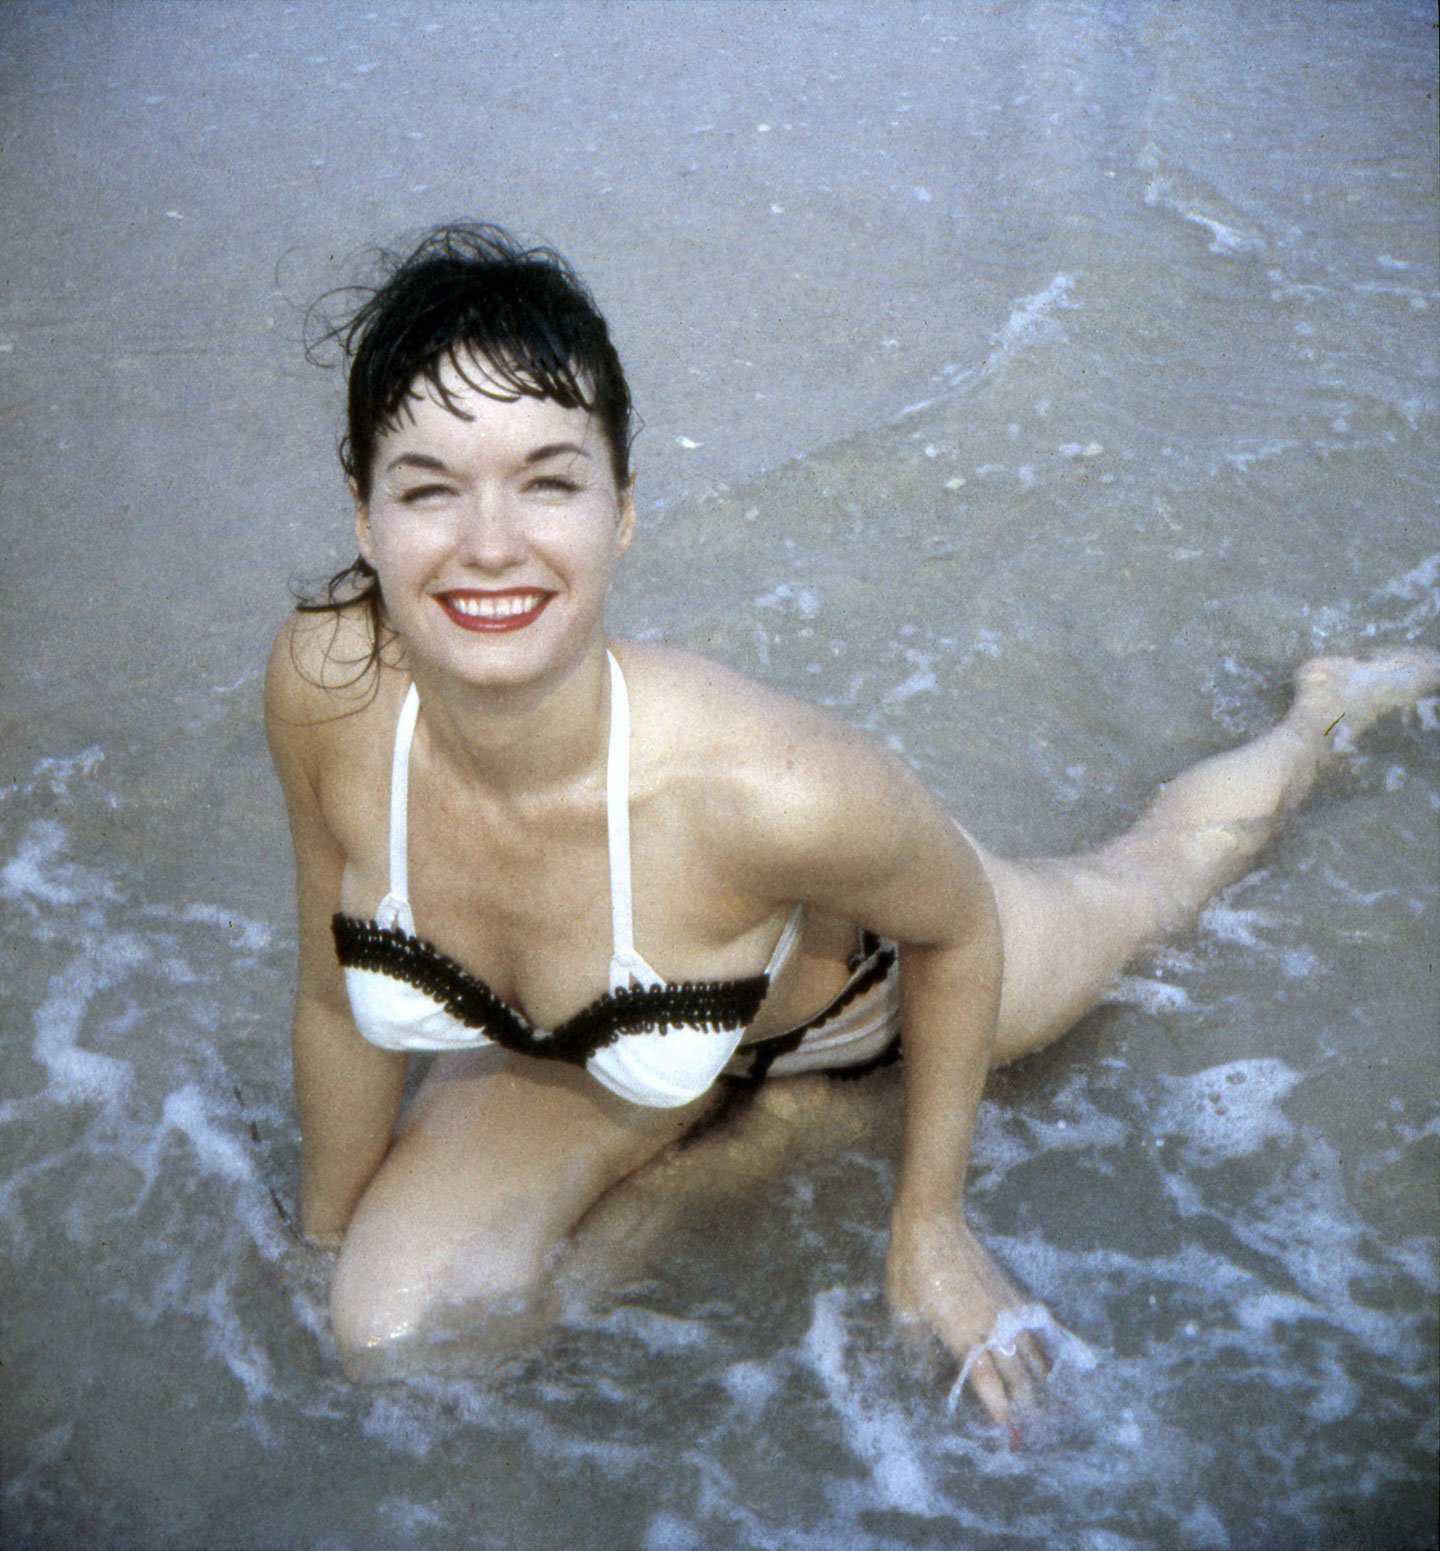 Why Bettie Page?